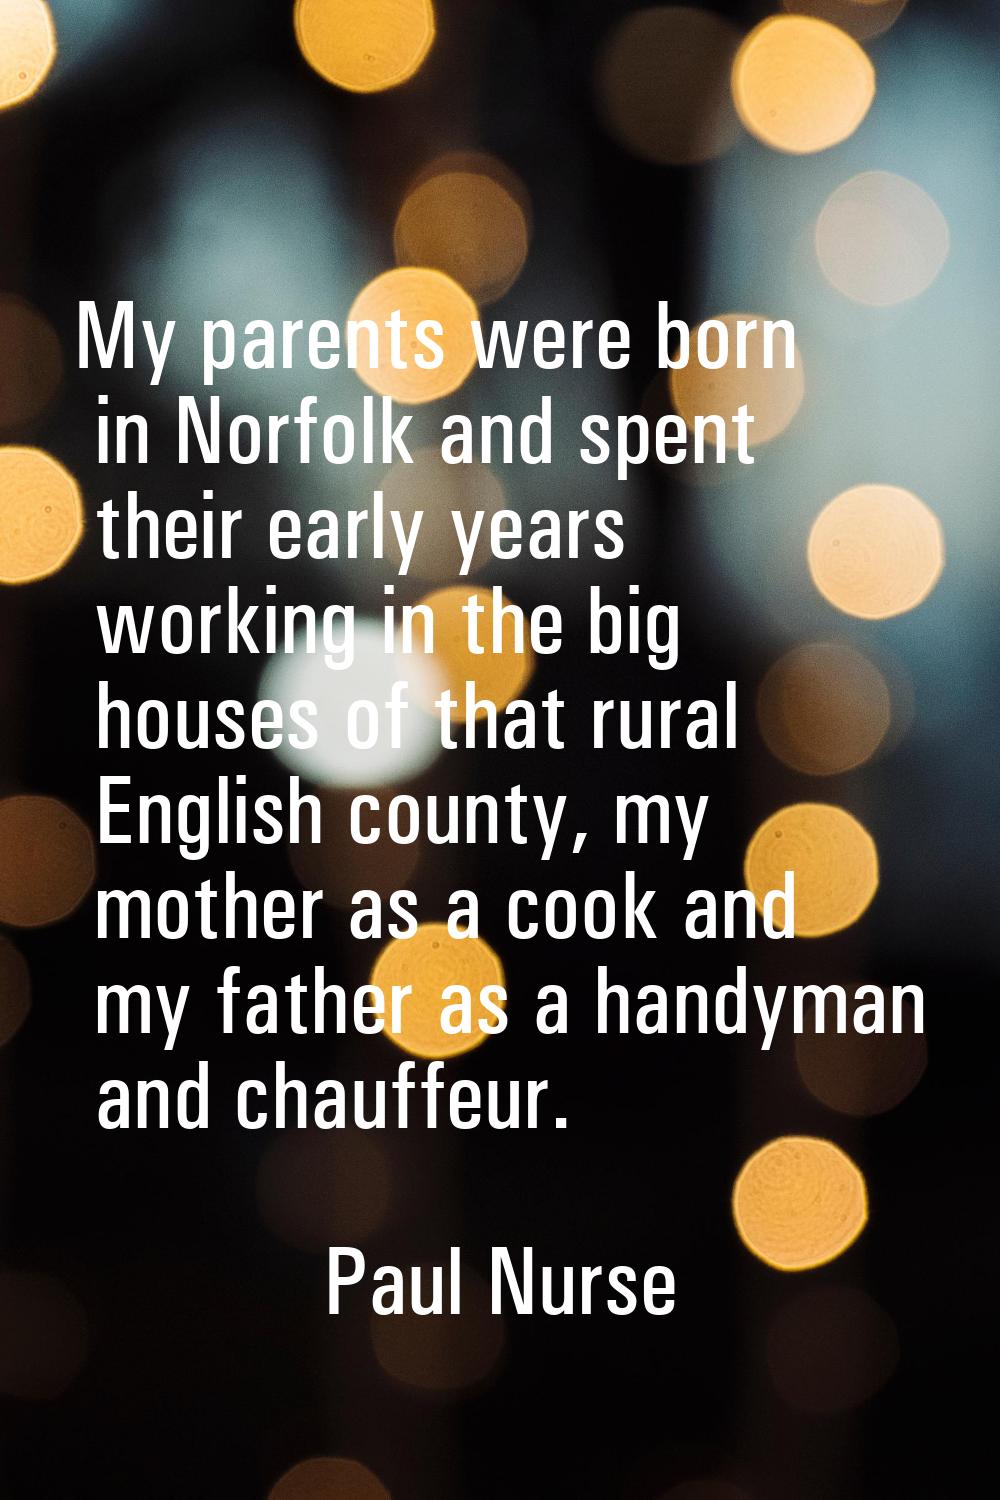 My parents were born in Norfolk and spent their early years working in the big houses of that rural